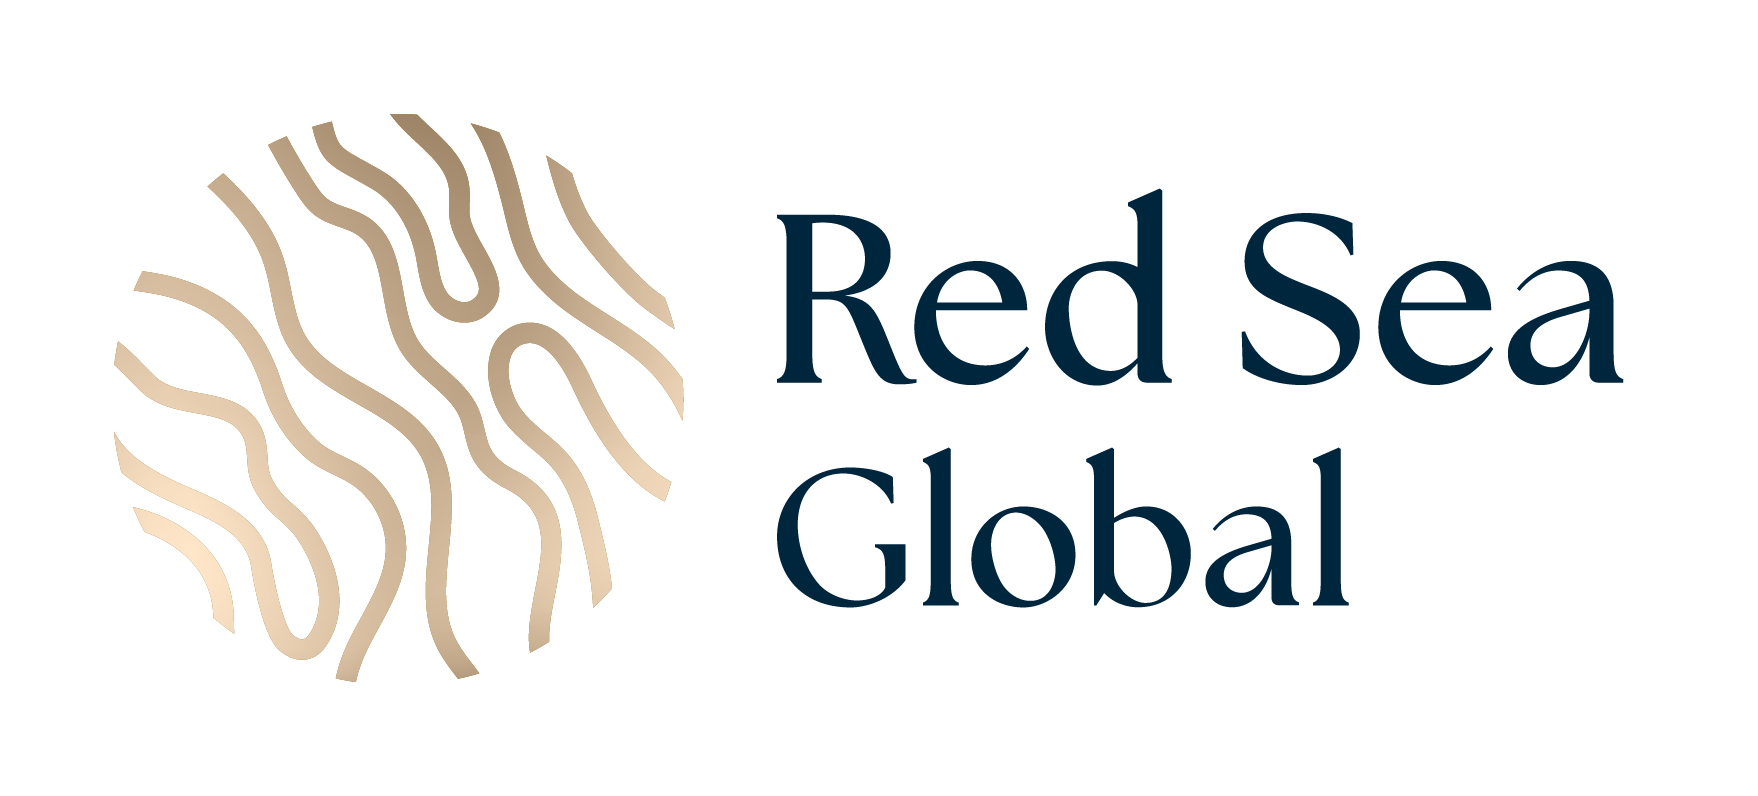 THE RED SEA Global